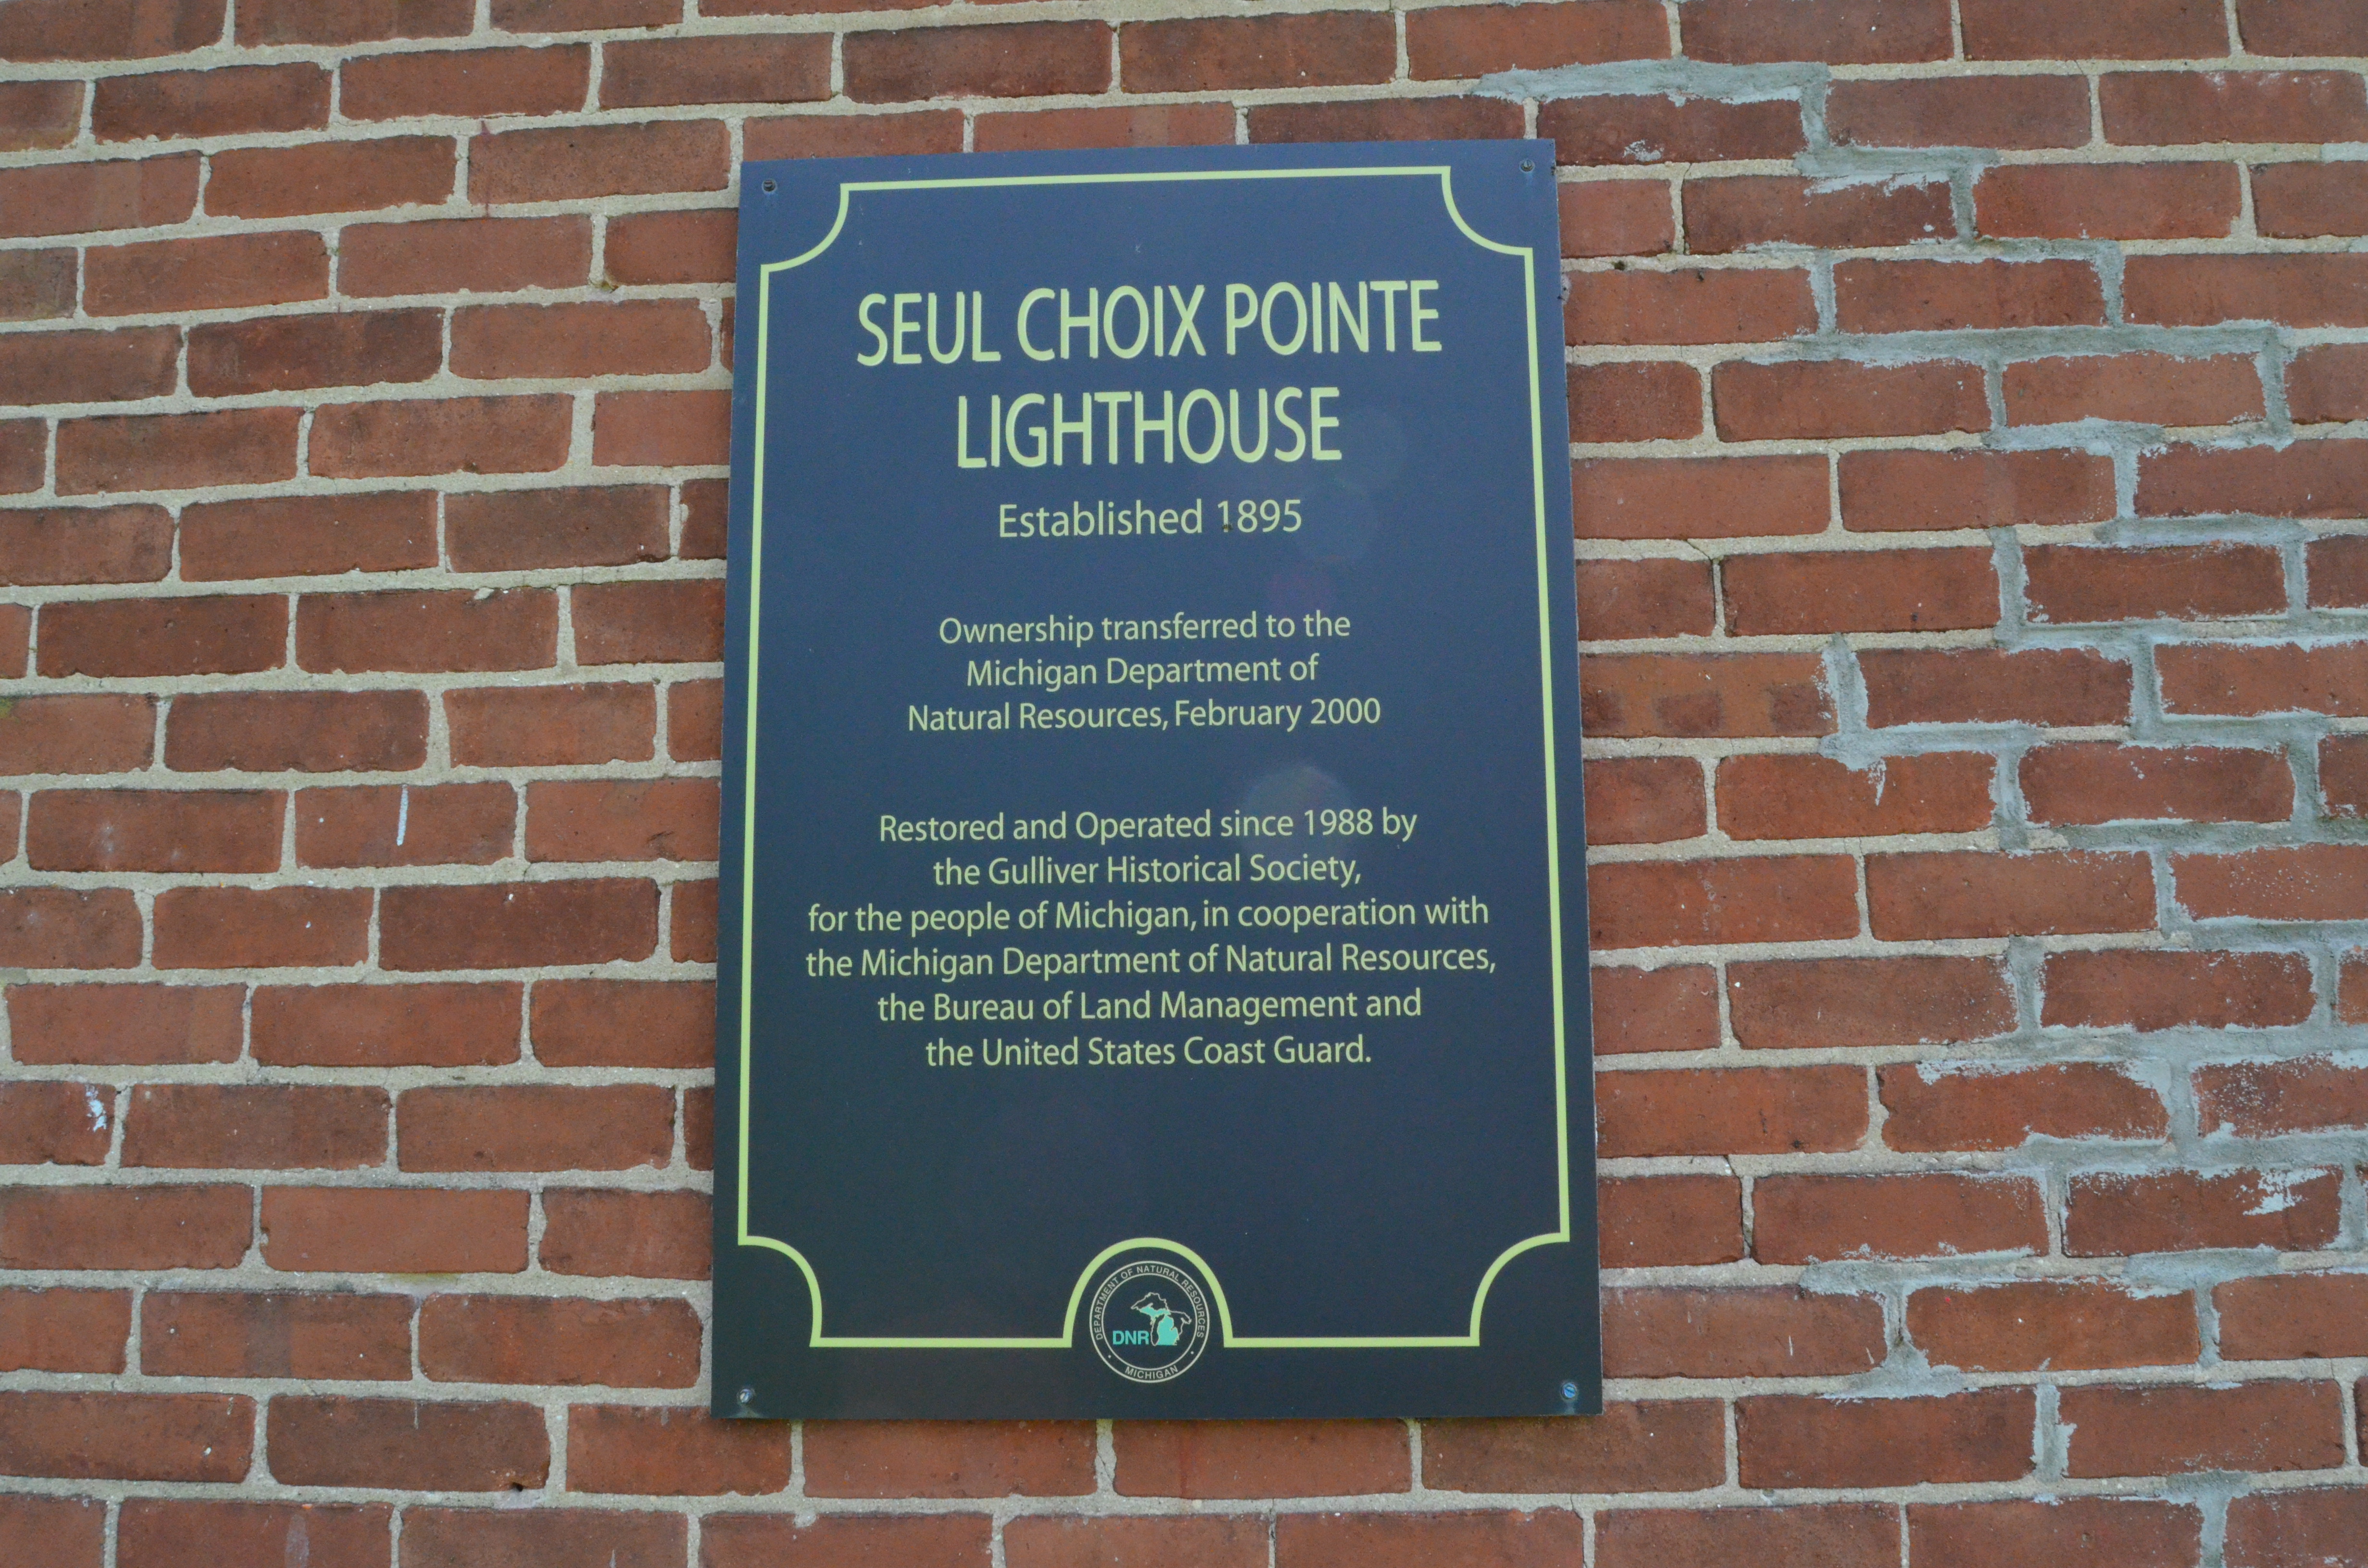 Seul Choix Point Lighthouse NRHP Info Sign